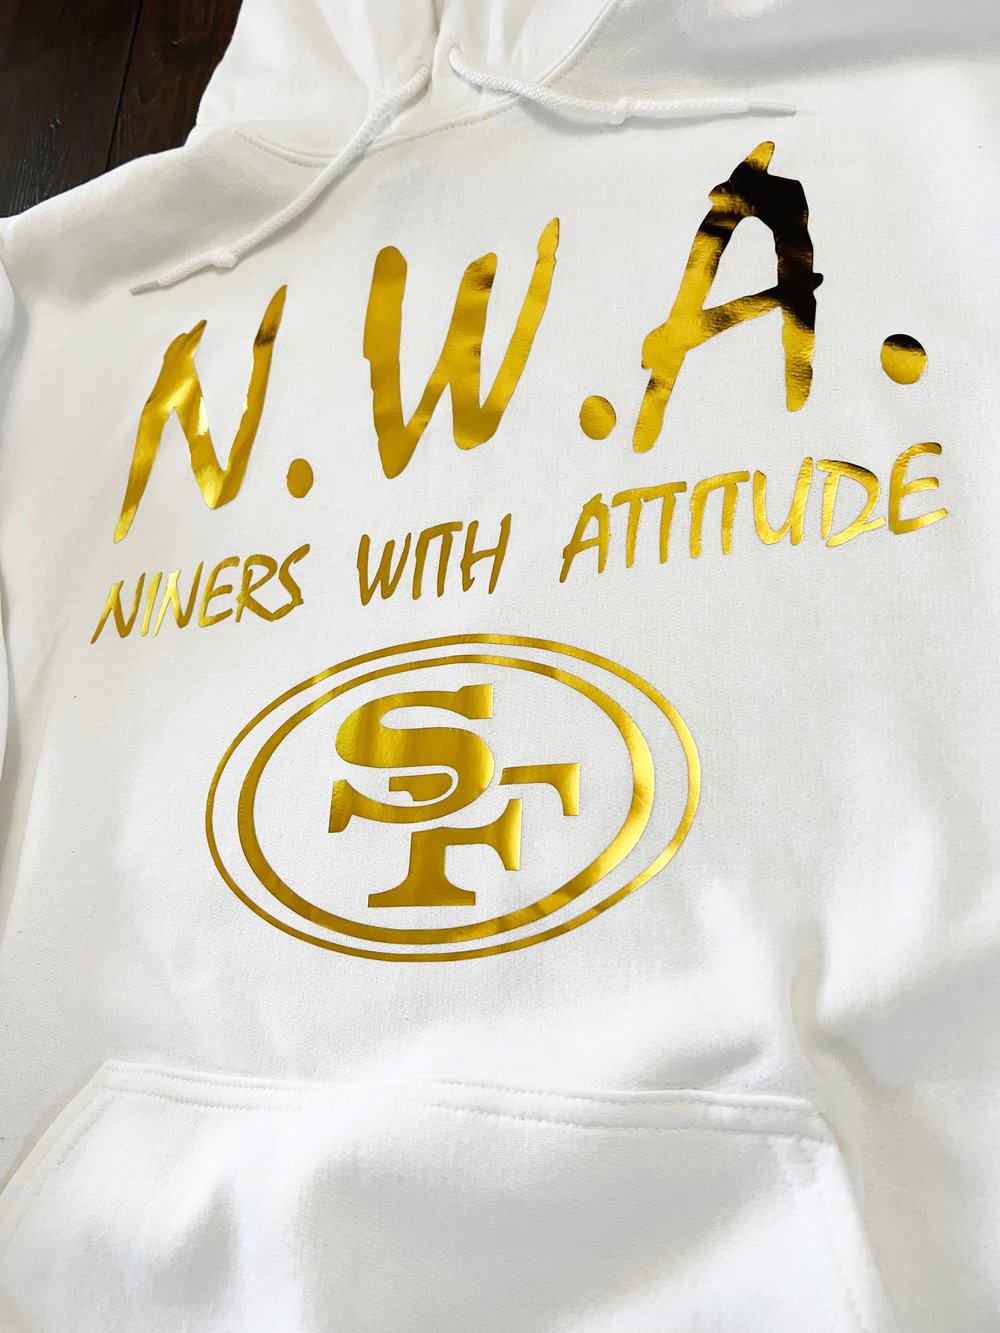 N.W.A. WHITE HOODIE, METALLIC GOLD LETTERS 